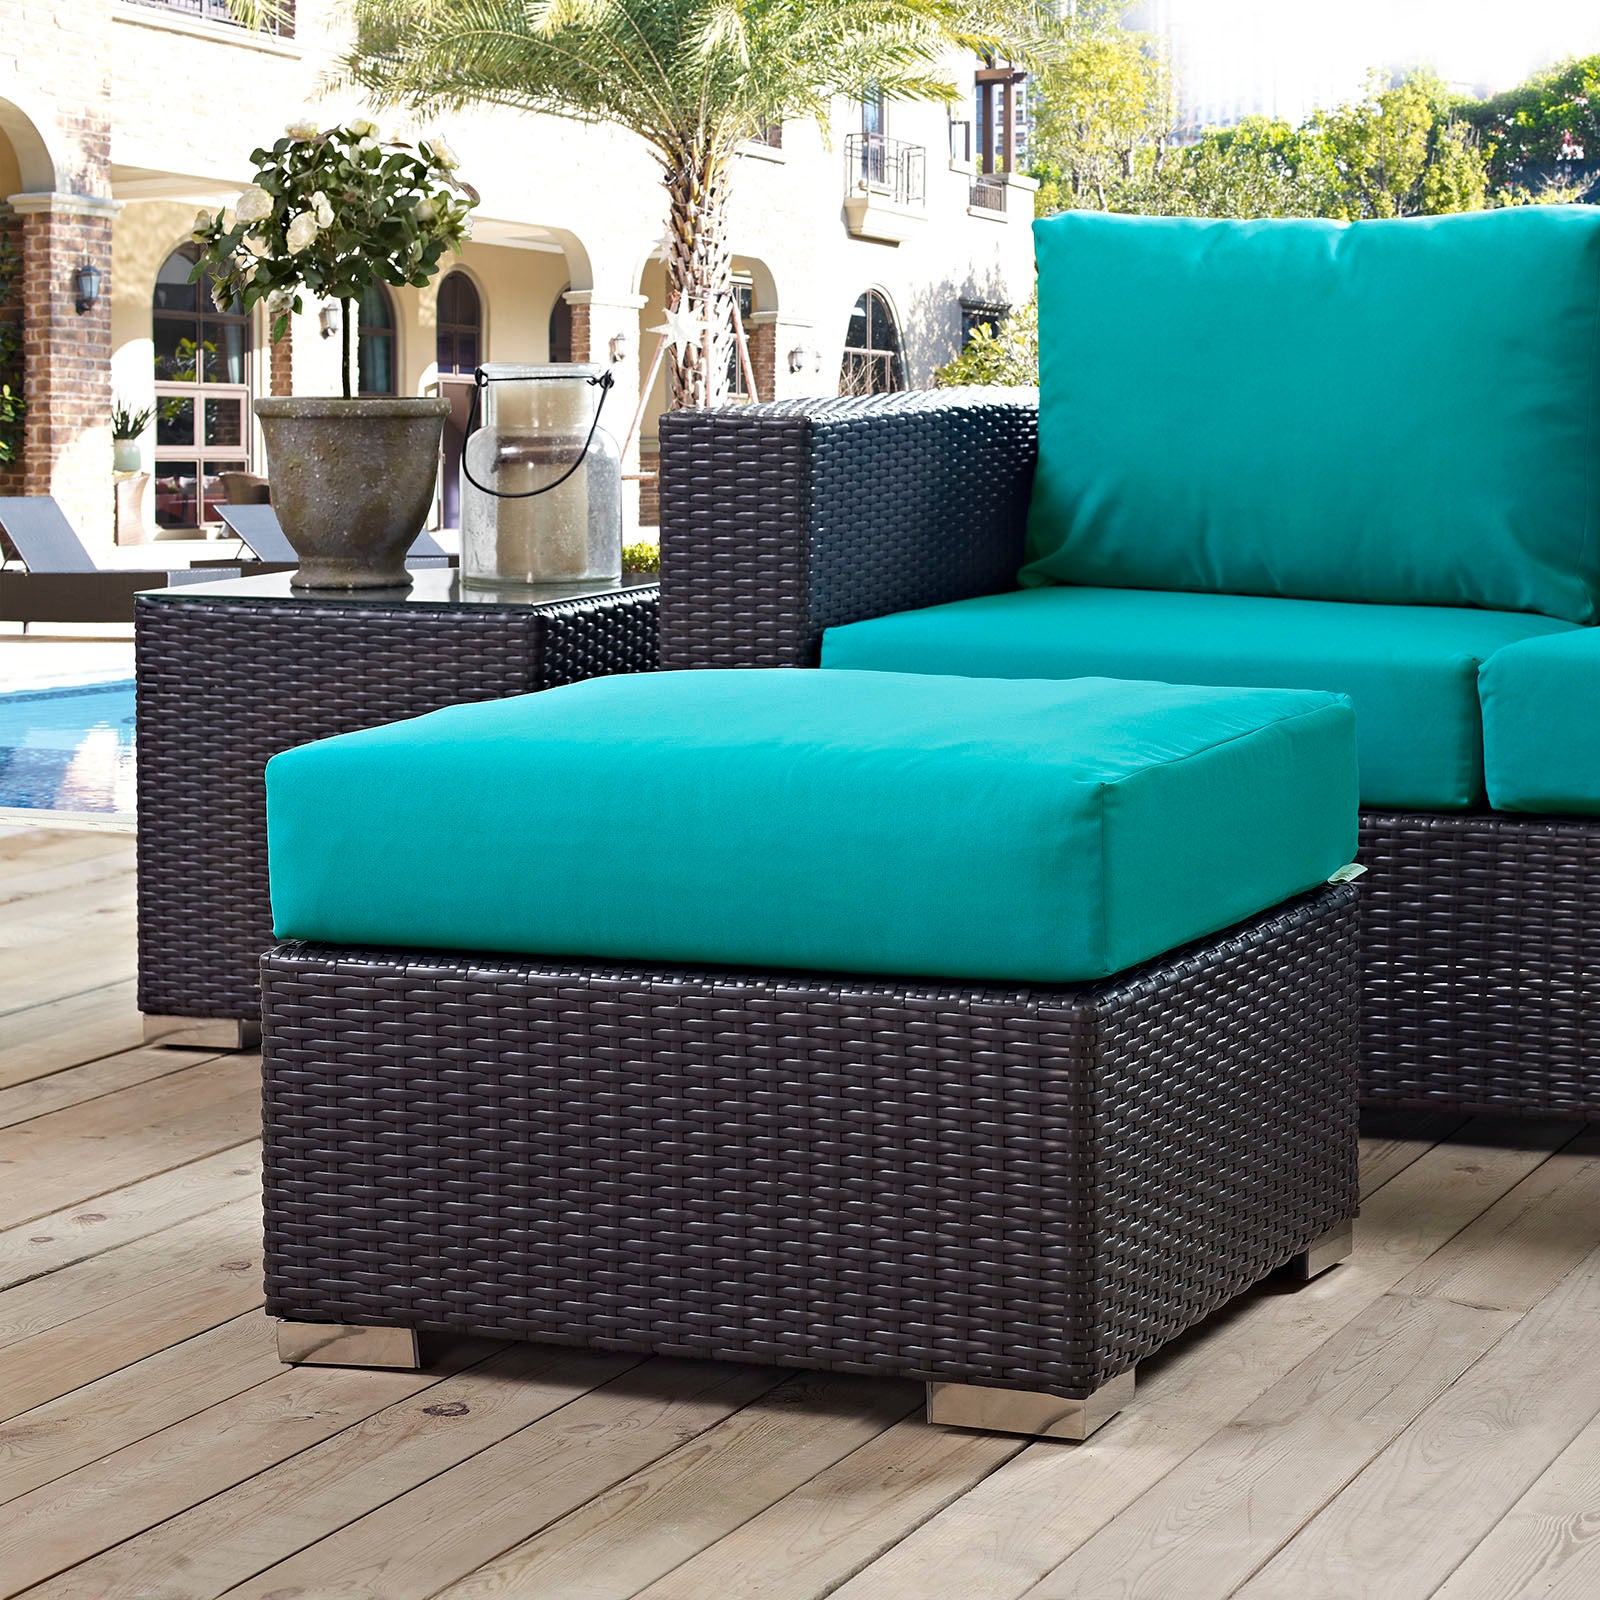 Modway Outdoor Stools & Benches - Convene Outdoor Patio Ottoman Turquoise